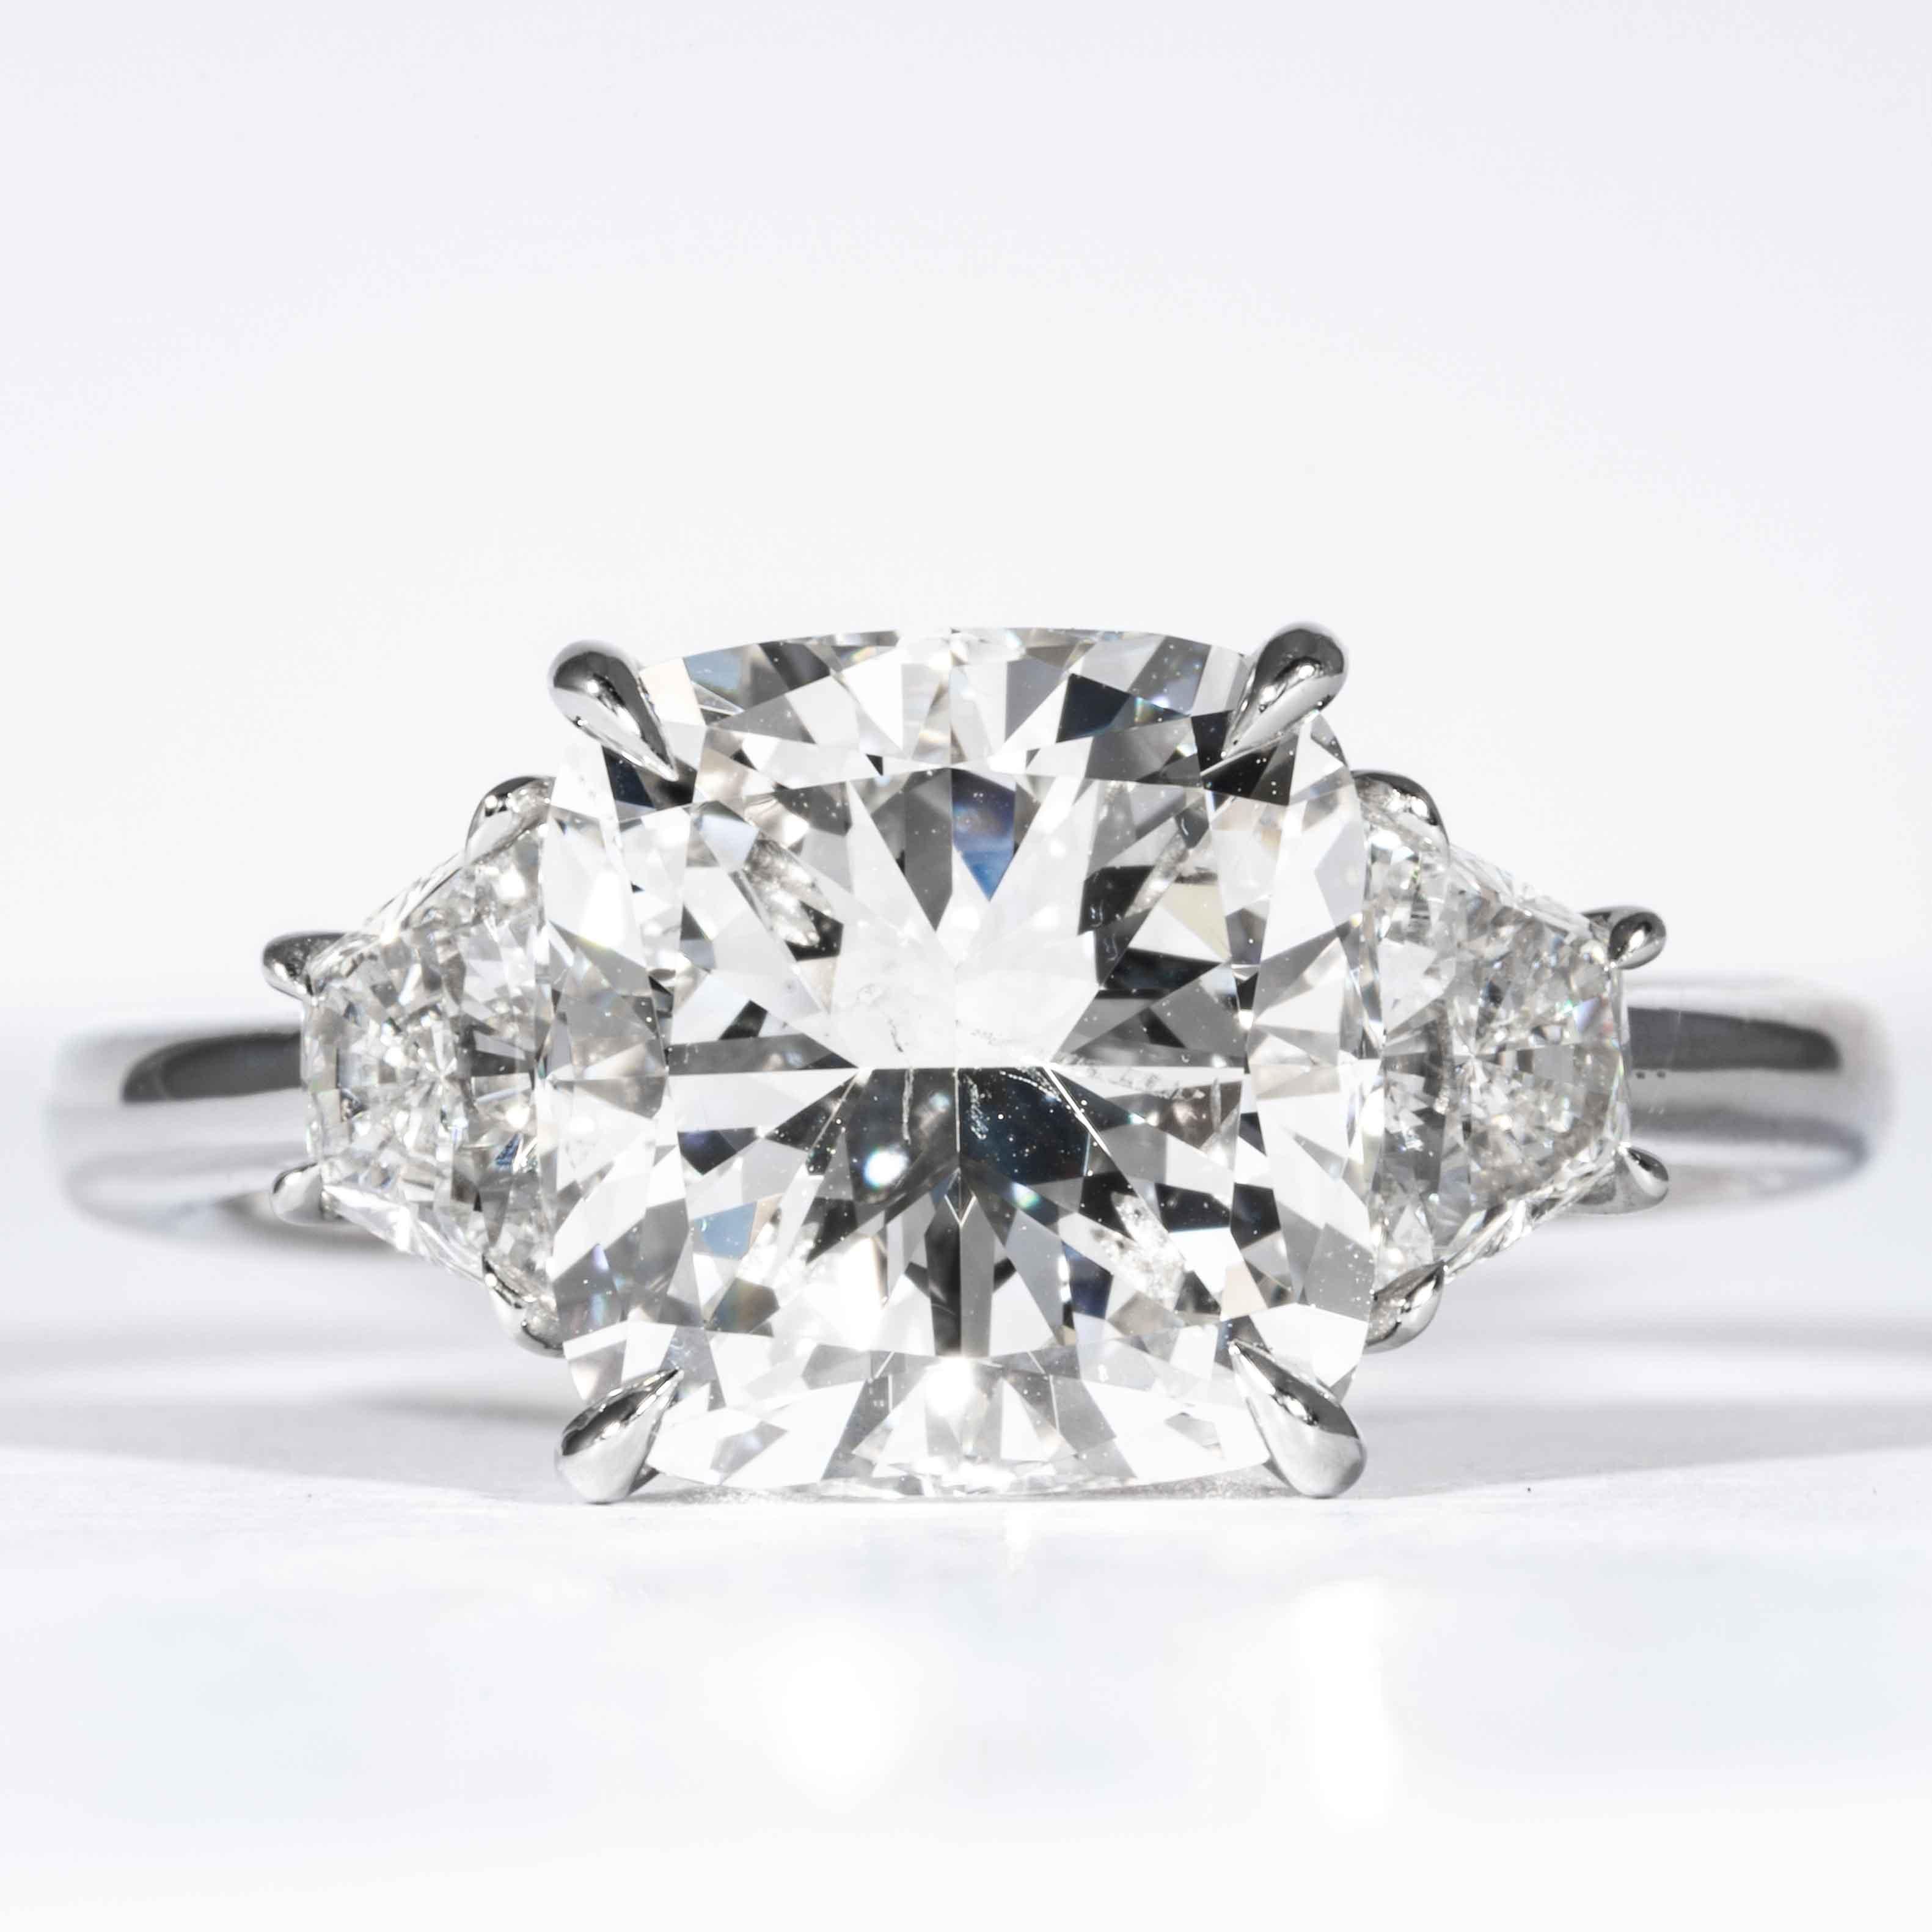 This 3-Stone diamond ring is offered by Shreve, Crump & Low. This 4.05 carat GIA Certified G SI2 cushion cut diamond measuring 9.33 x 9.11 x 6.11 mm is custom set in a handcrafted Shreve, Crump & Low platinum 3-stone ring. The 4.05 carat center